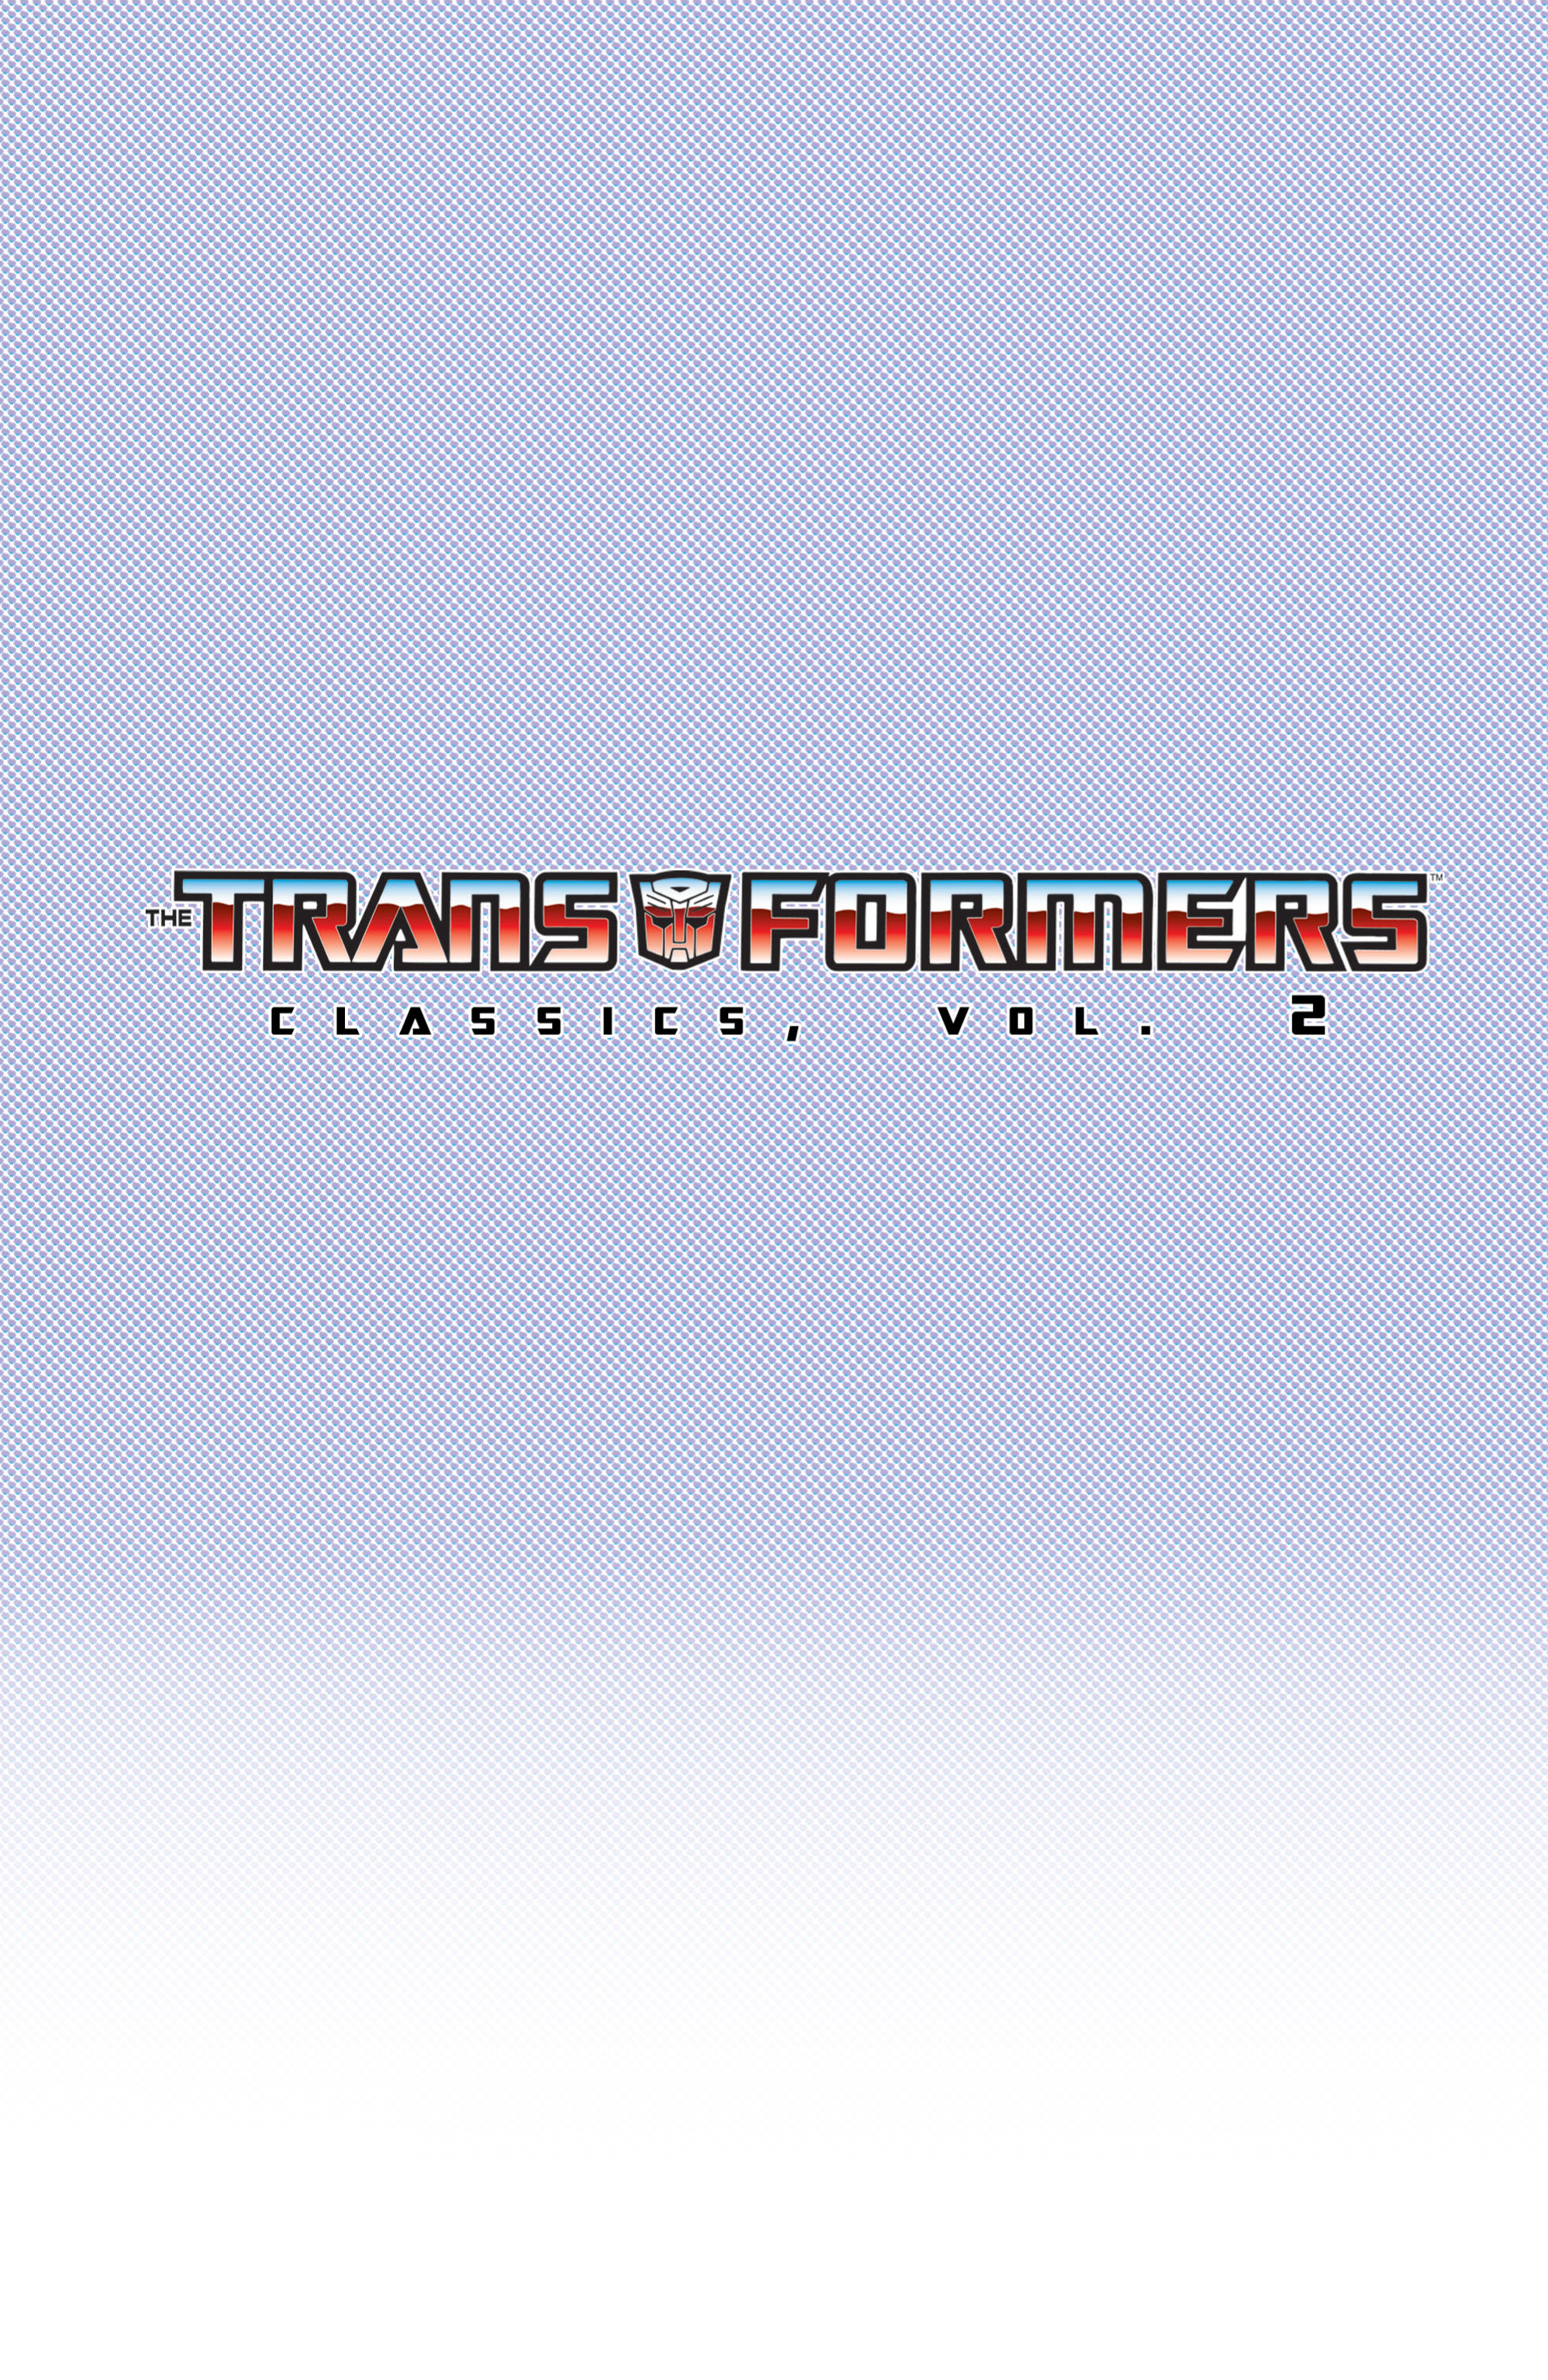 Read online The Transformers Classics comic -  Issue # TPB 2 - 2